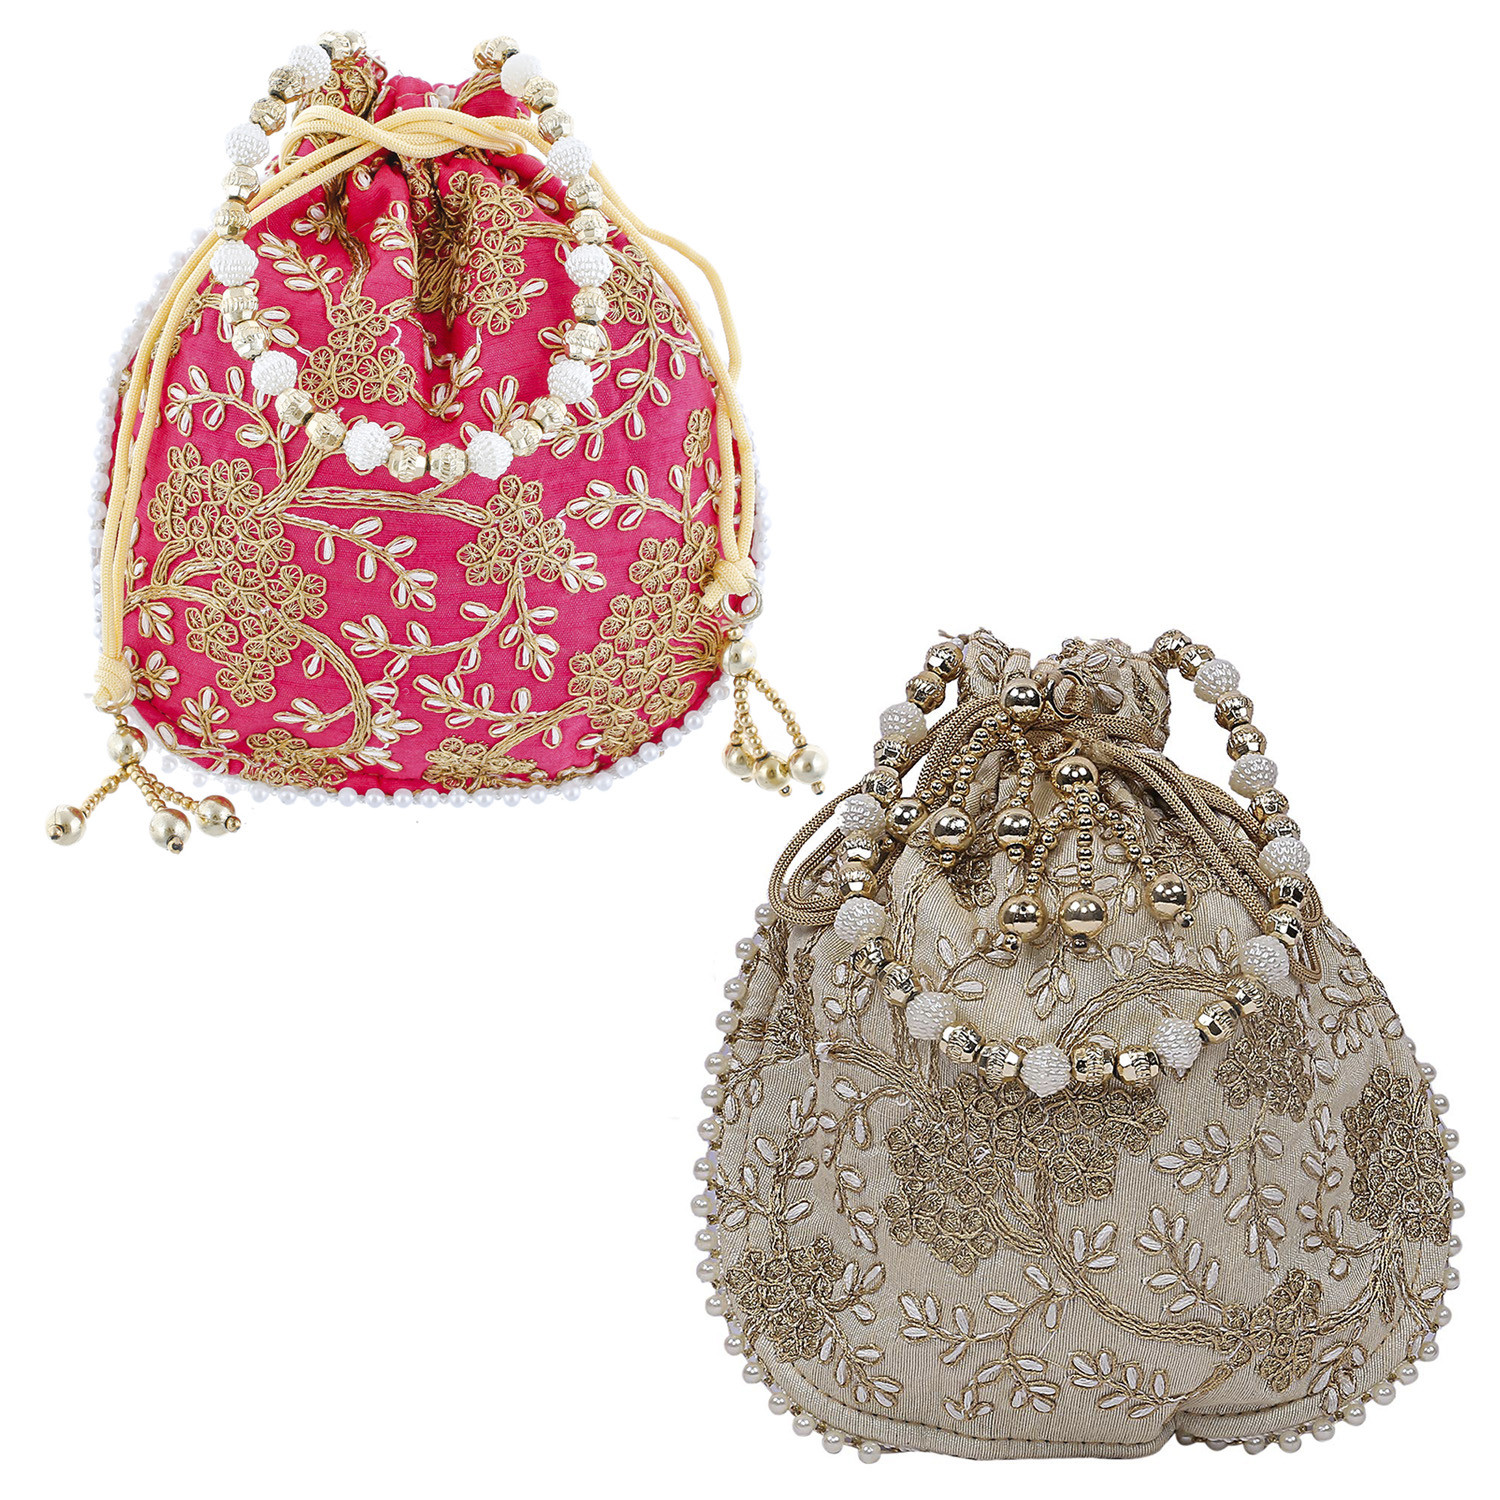 Kuber Industries Embroidery Drawstring Potli|Hand Purse With Gold Pearl Border & Handle For Woman,Girls Pack of 2 (Pink & Cream)